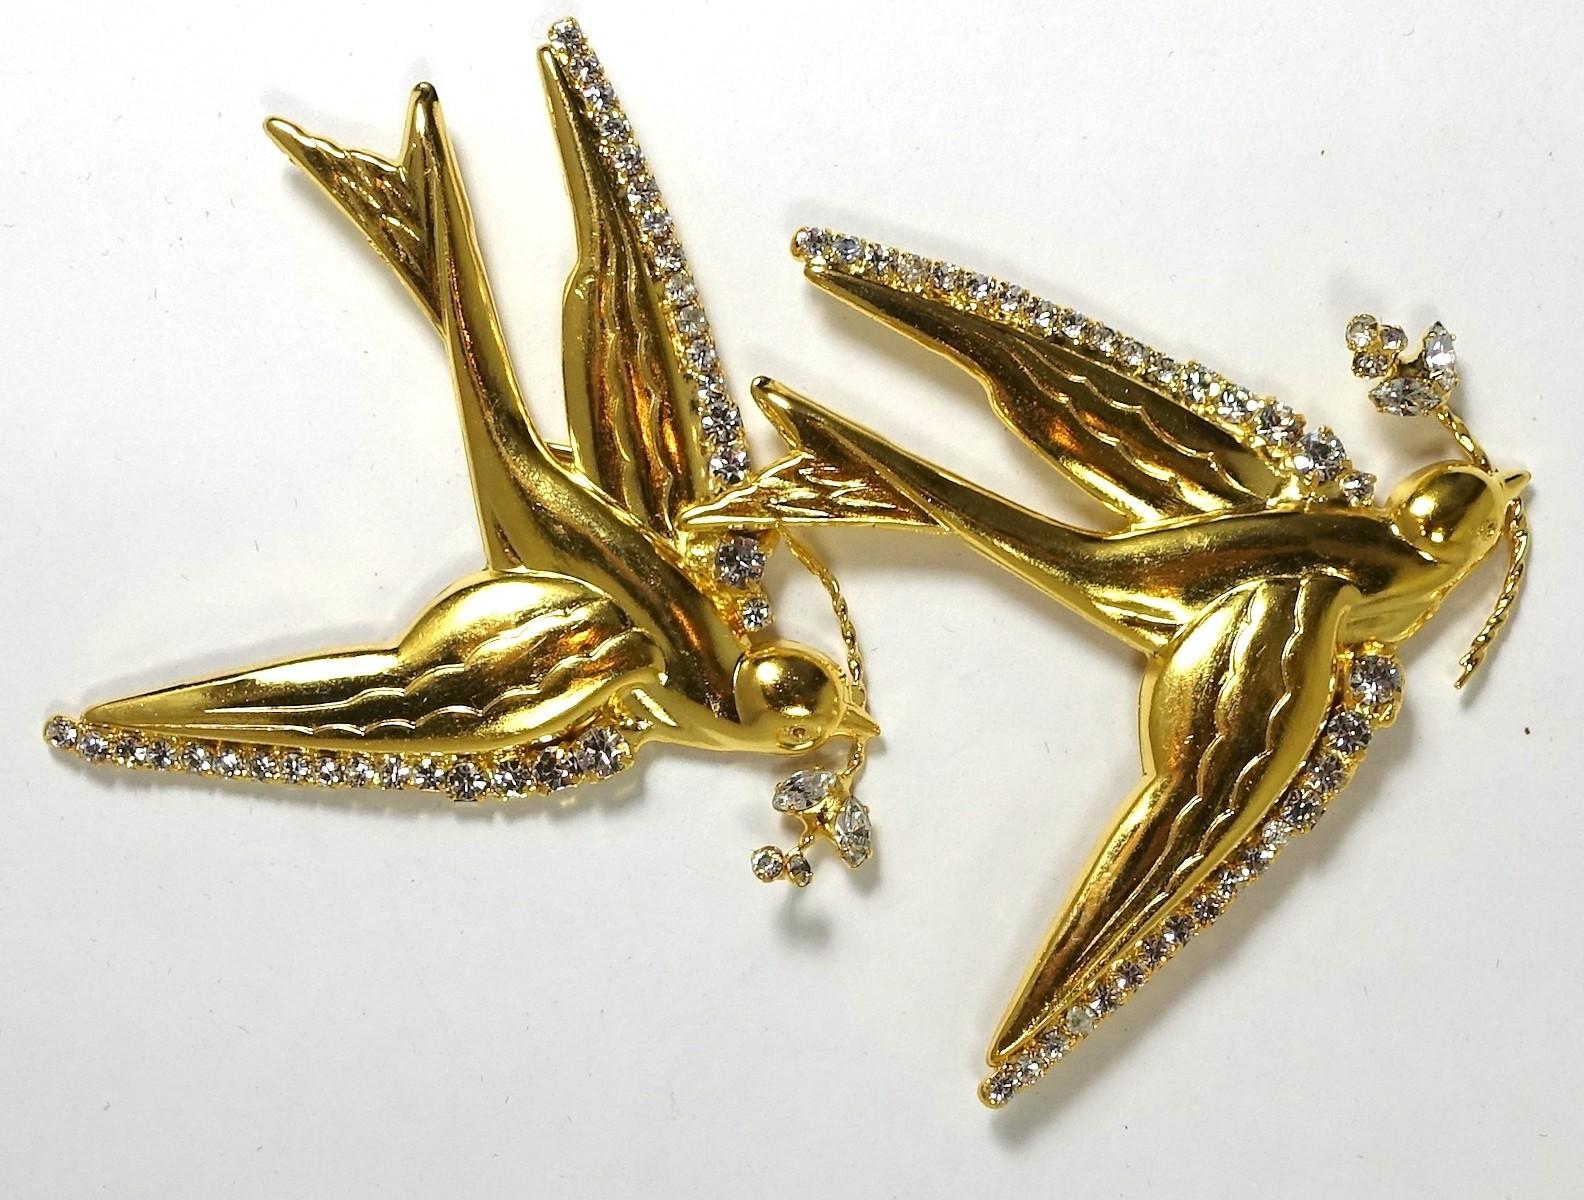 This signed One of a kind Robert Sorrell brooch features birds in flight with clear crystal accents in a gold tone setting.    In excellent condition, this brooch measures 4-7/8” x 4” and is signed “Sorrell Originals”.